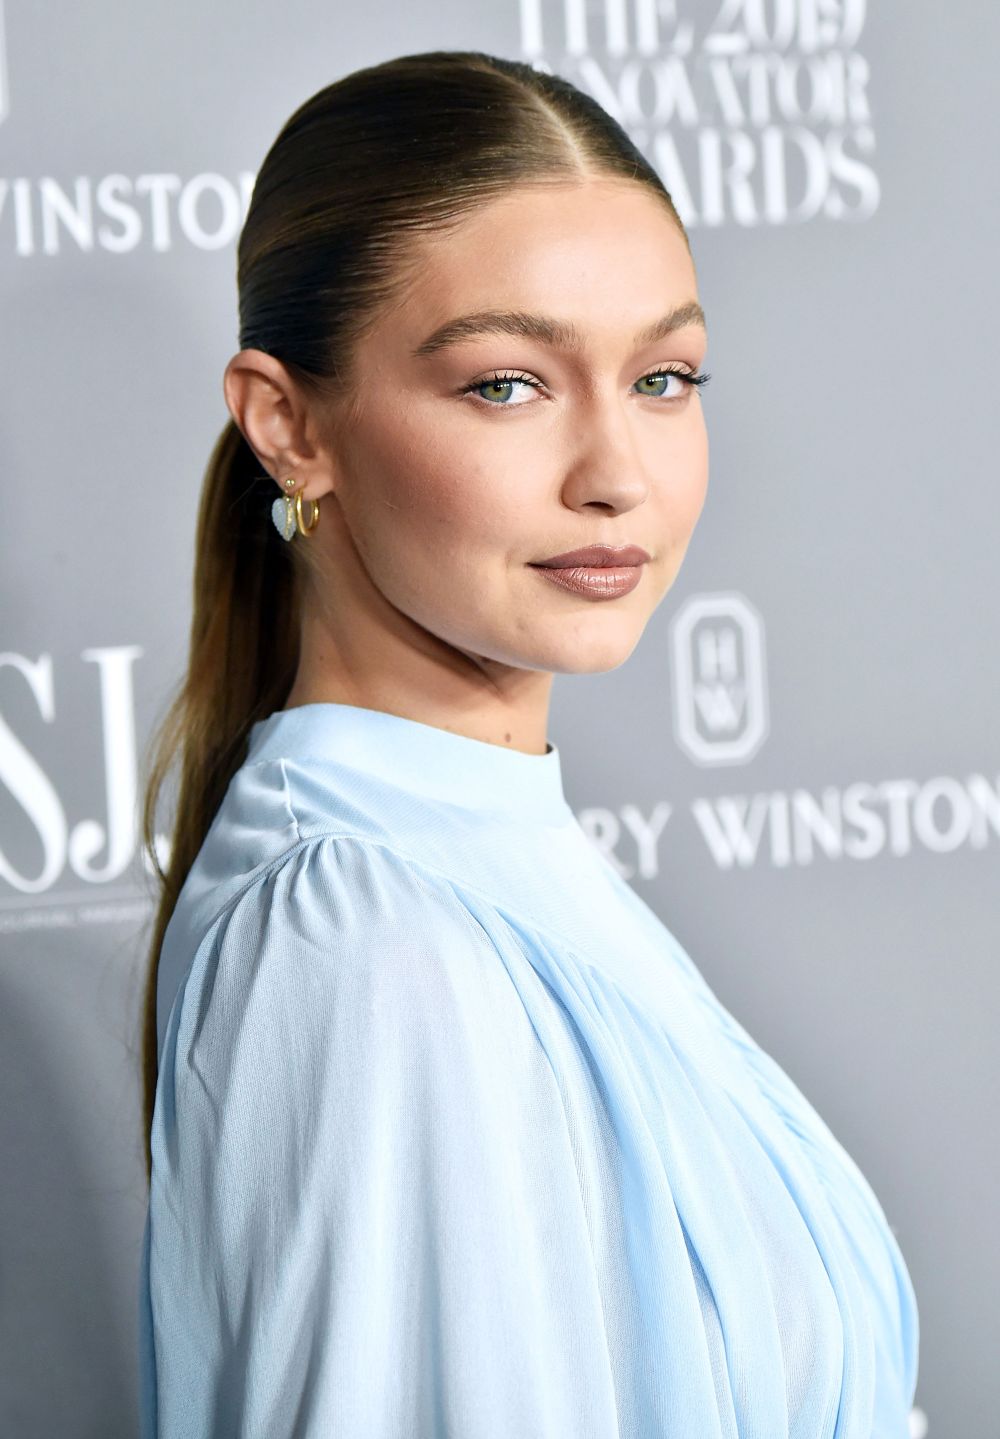 Gigi Hadid Claps Back at Style Haters